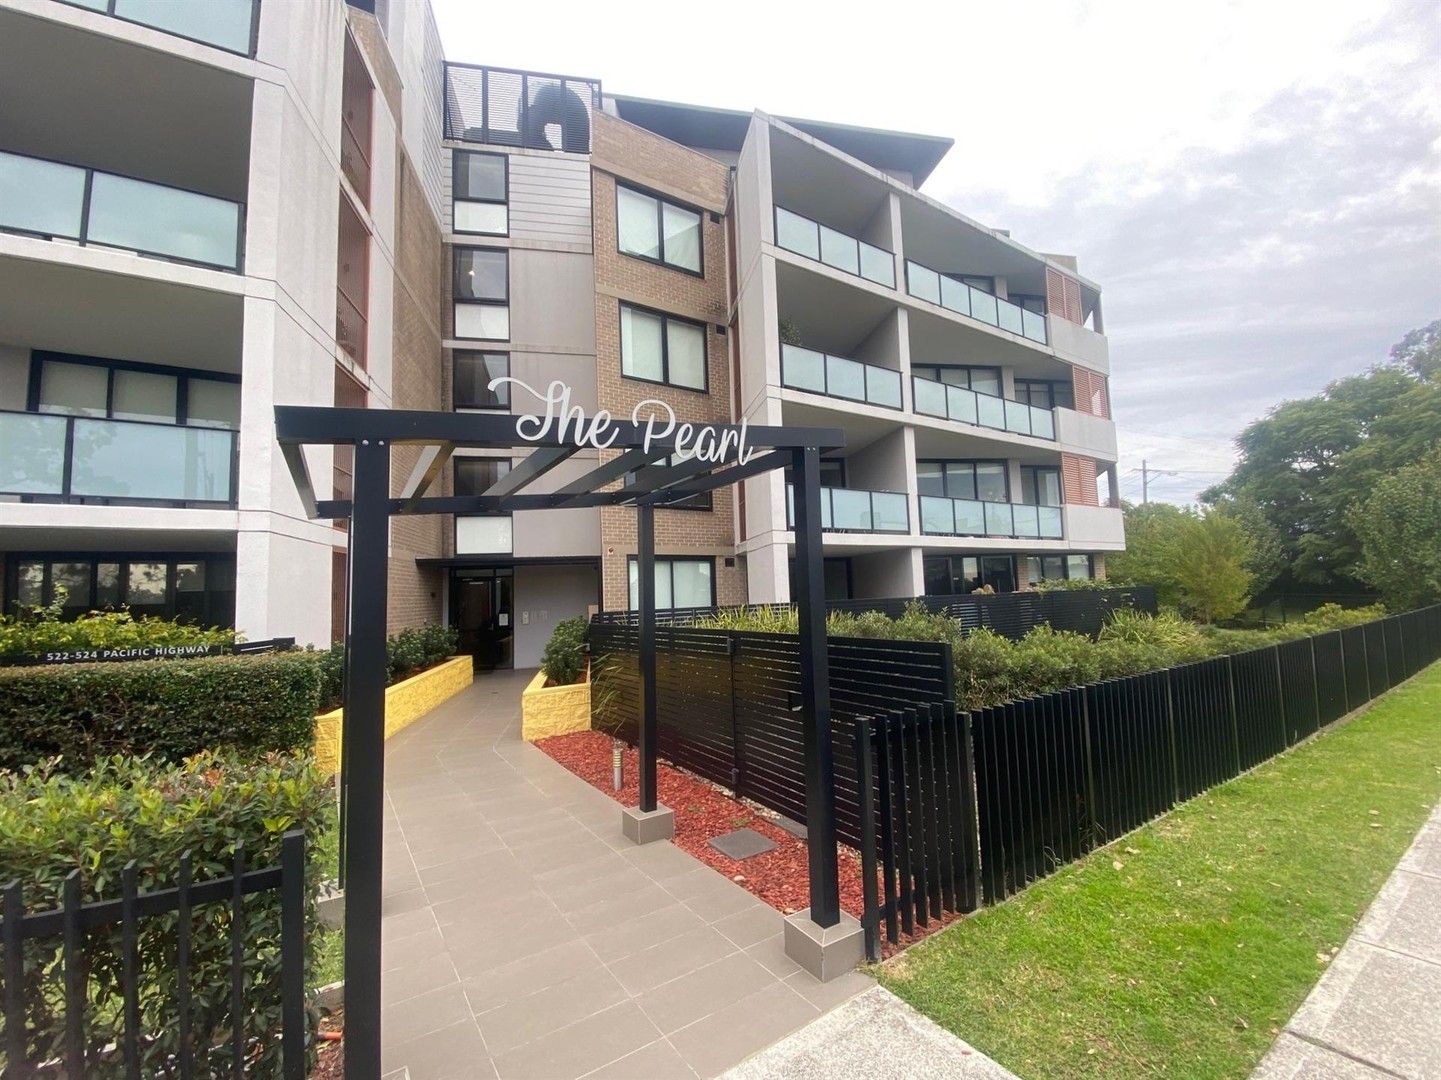 5/522-524 Pacific Highway, Mount Colah NSW 2079